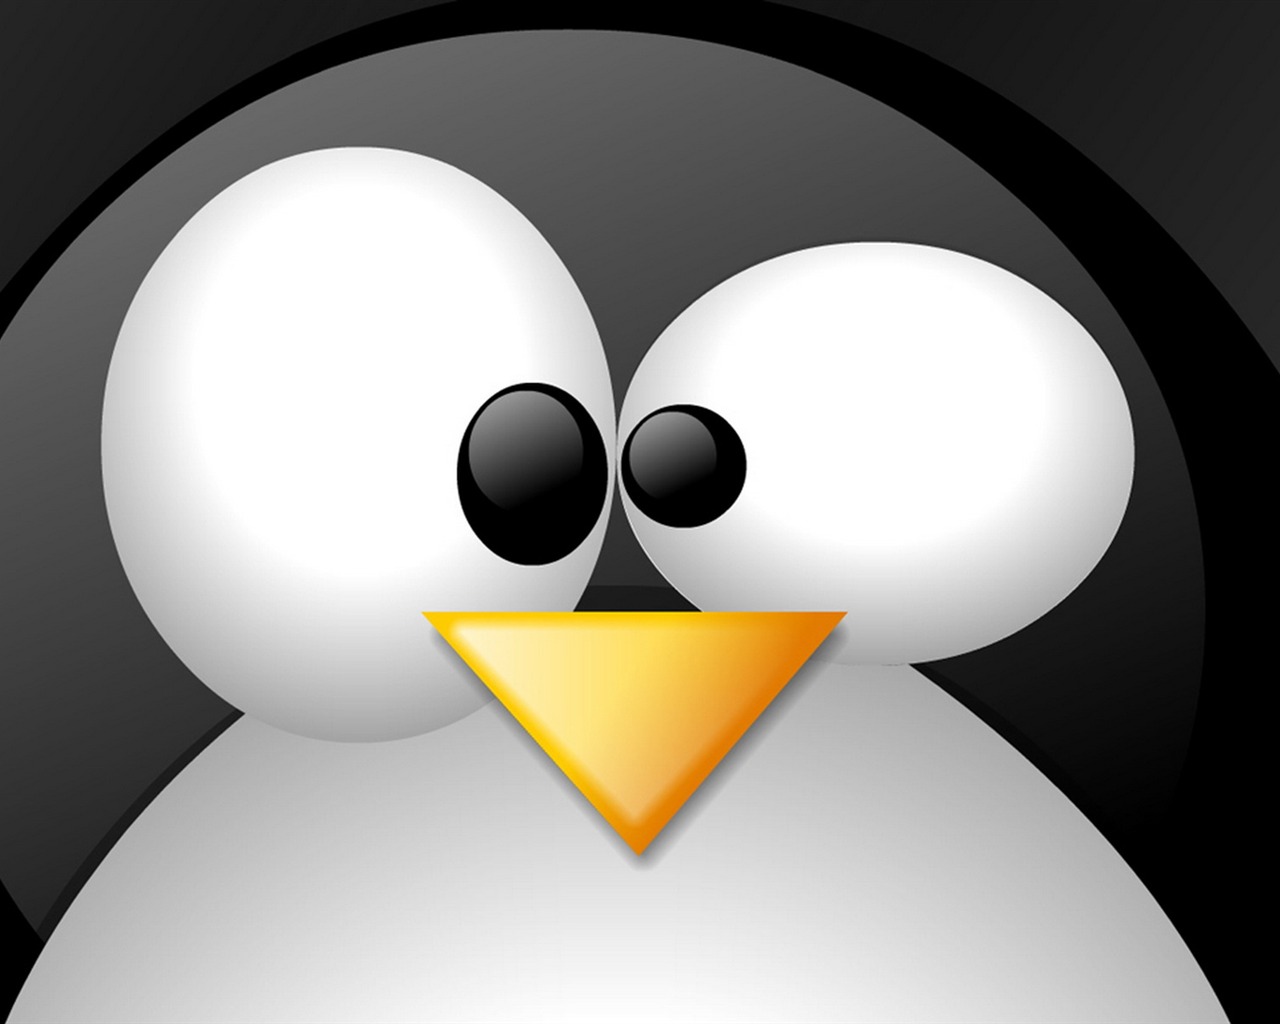 Linux tapety (3) #16 - 1280x1024